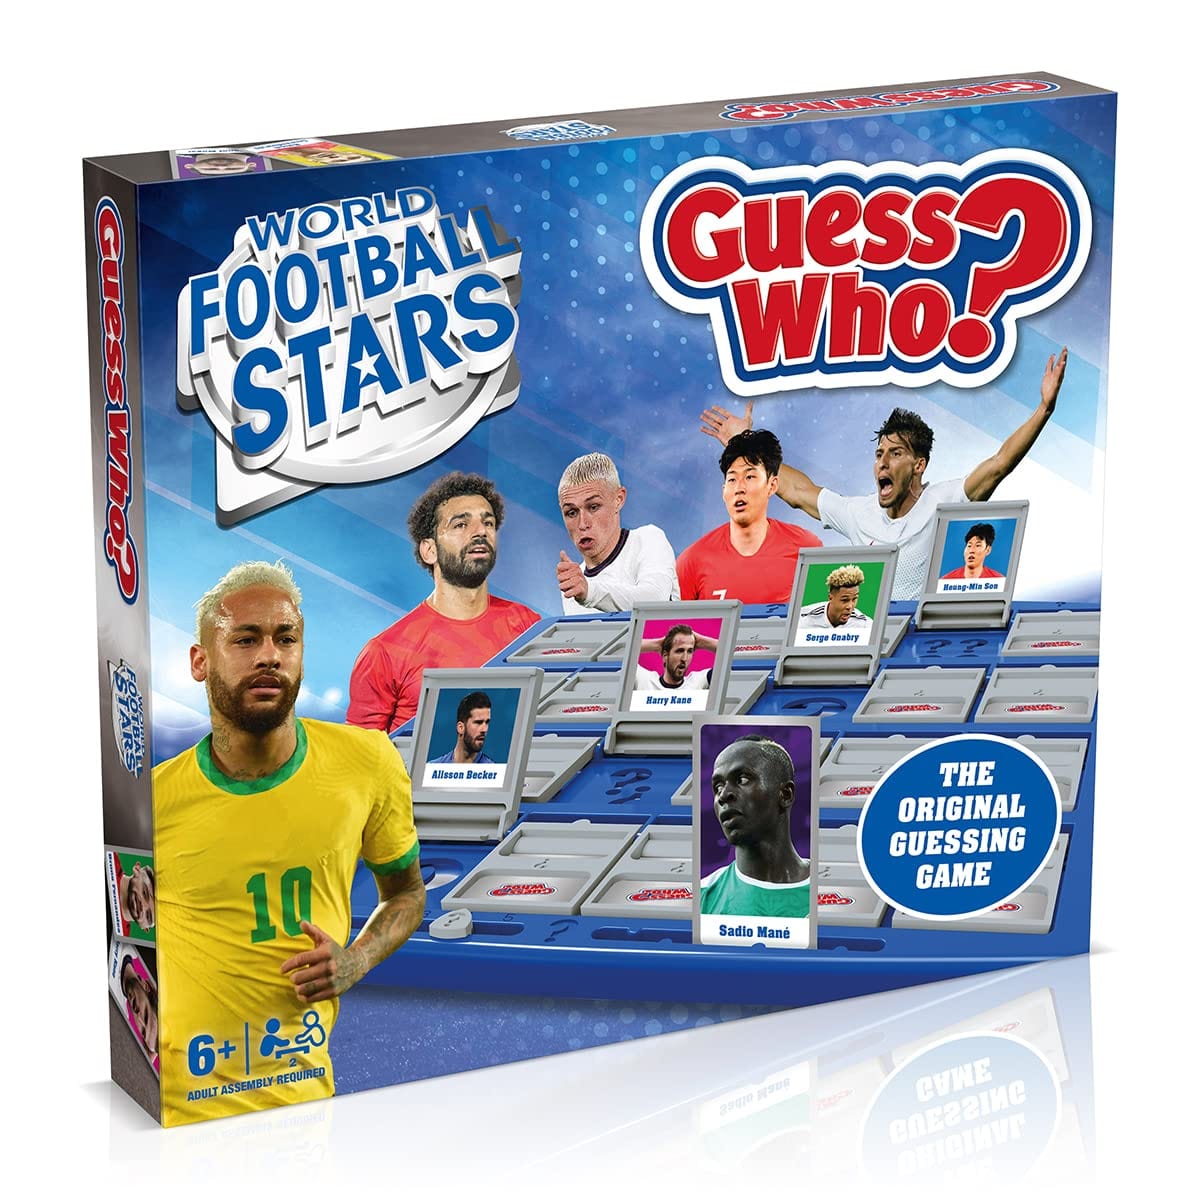 Guess Who! World football stars - Zippigames